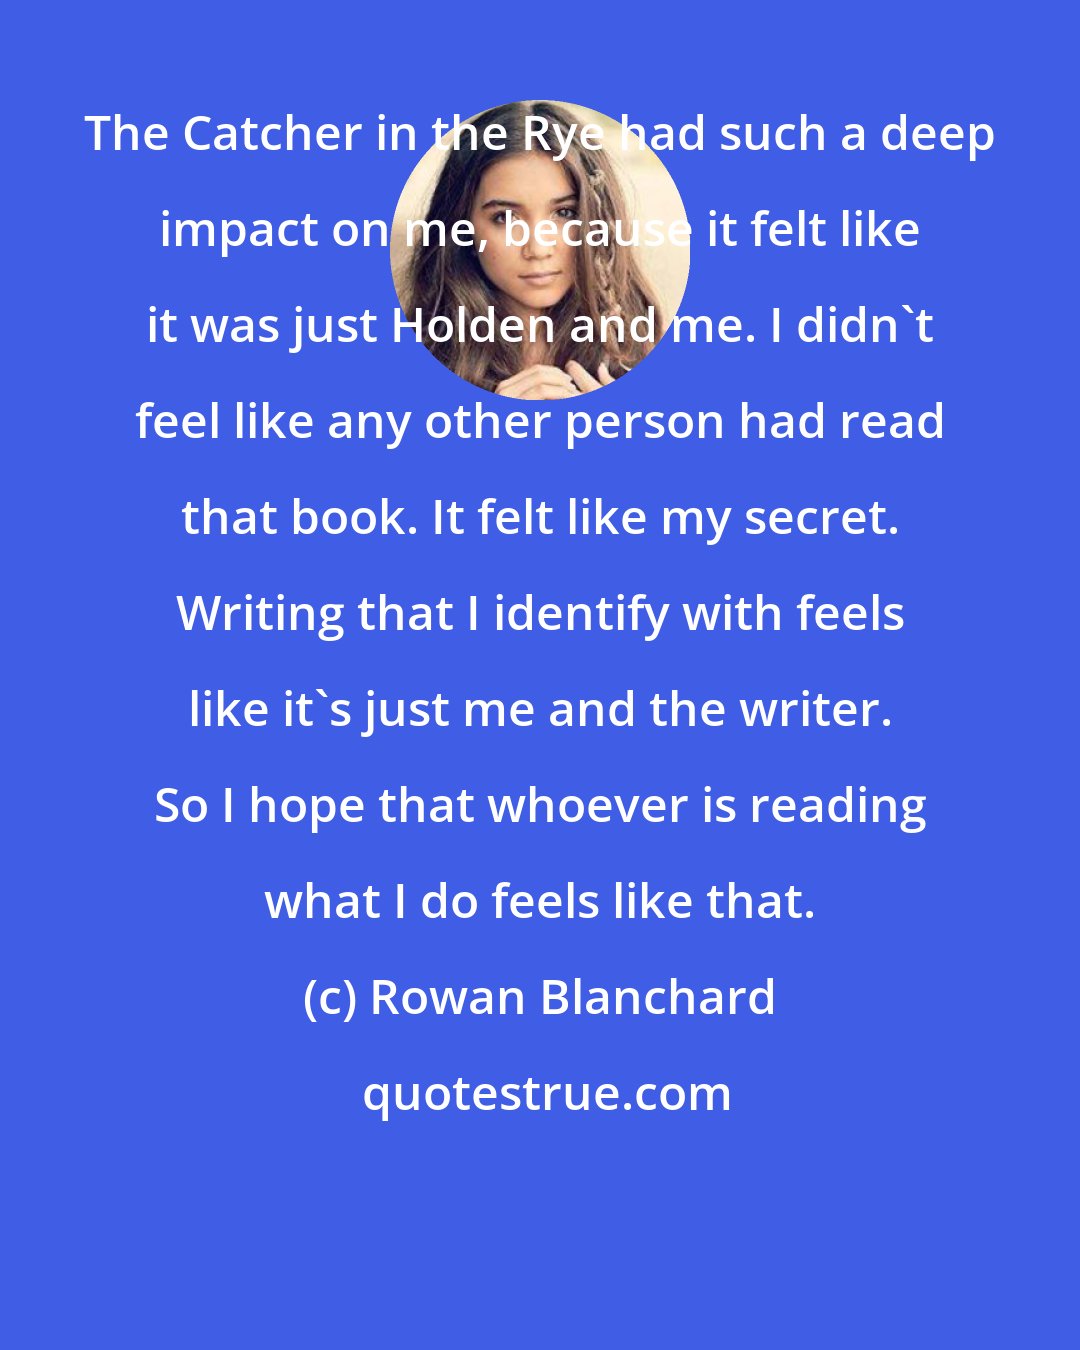 Rowan Blanchard: The Catcher in the Rye had such a deep impact on me, because it felt like it was just Holden and me. I didn't feel like any other person had read that book. It felt like my secret. Writing that I identify with feels like it's just me and the writer. So I hope that whoever is reading what I do feels like that.